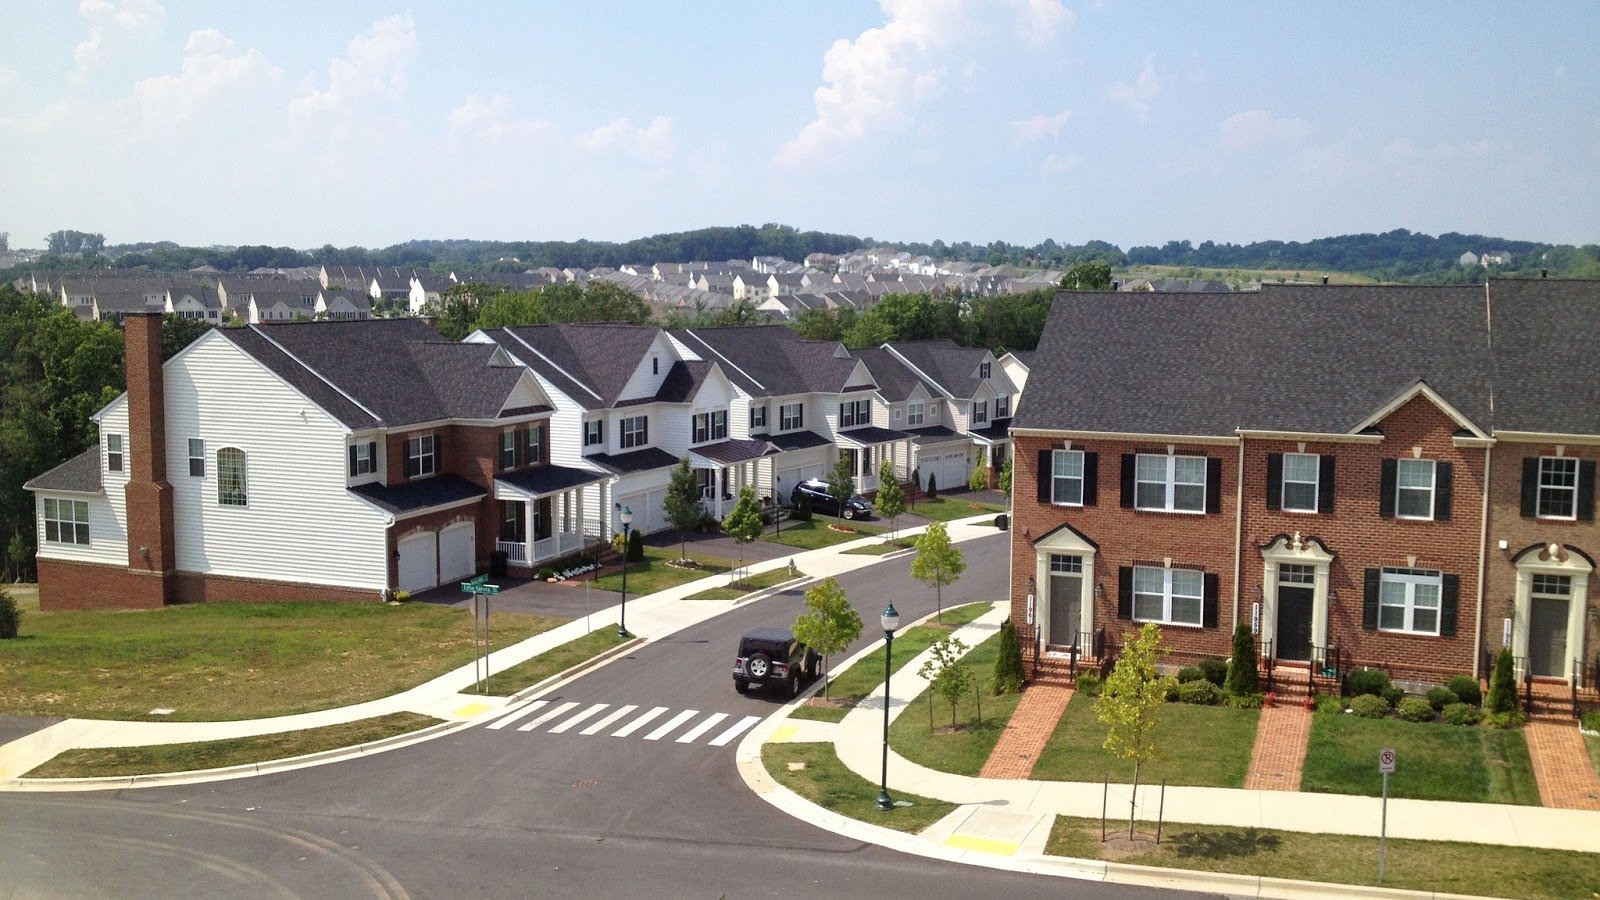 Urban vs Suburban Living: Contrasts and Considerations